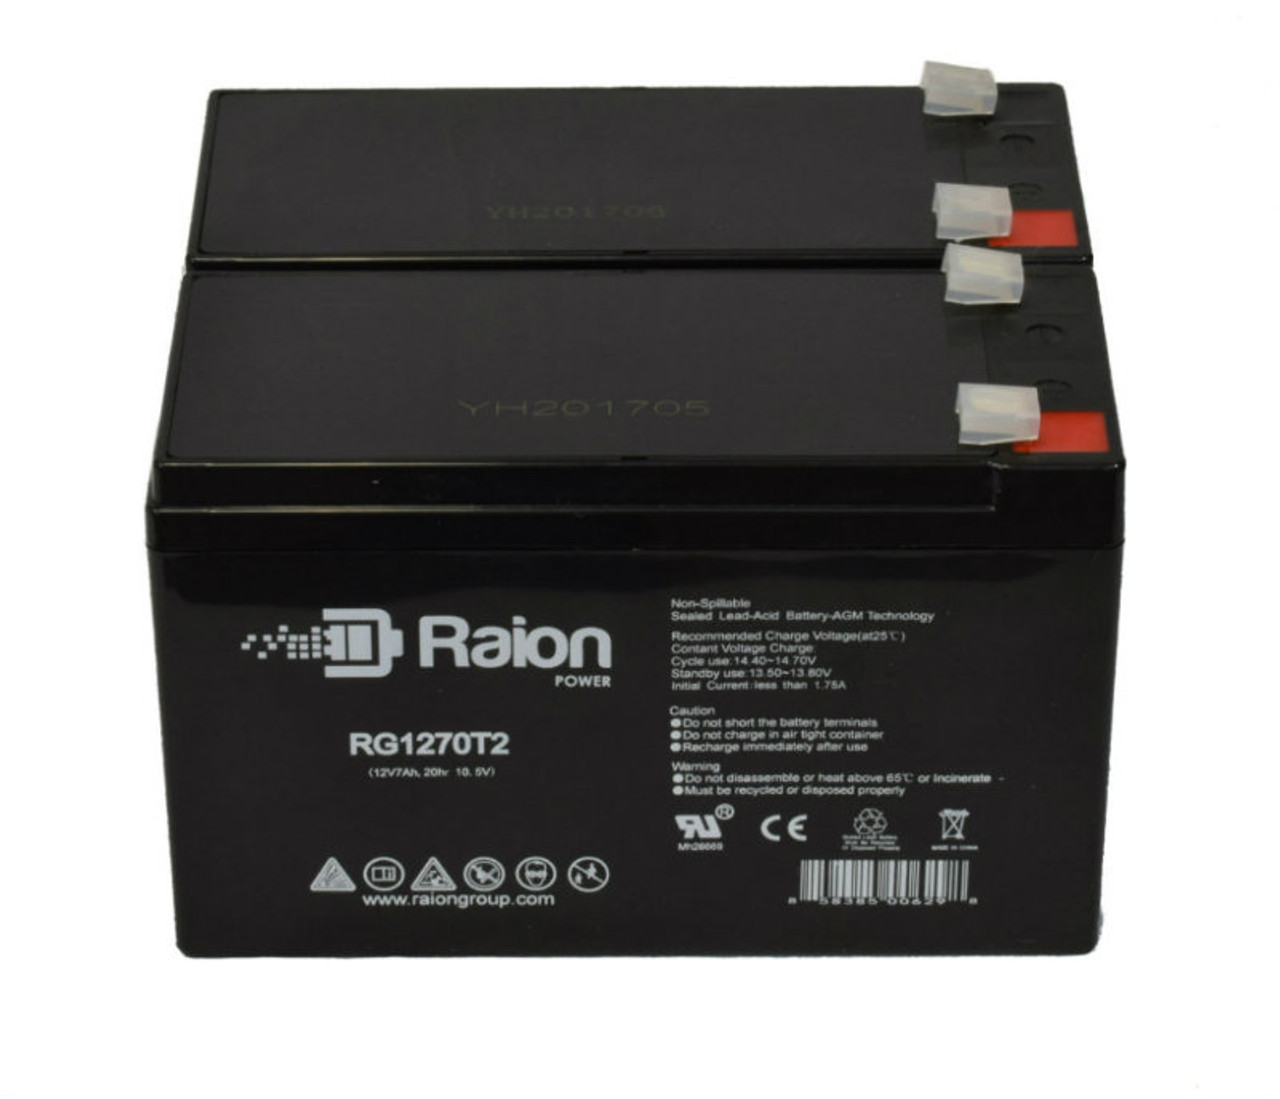 Raion Power Replacement 12V 7Ah Battery for PBQ C 7-12 F1 - 2 Pack